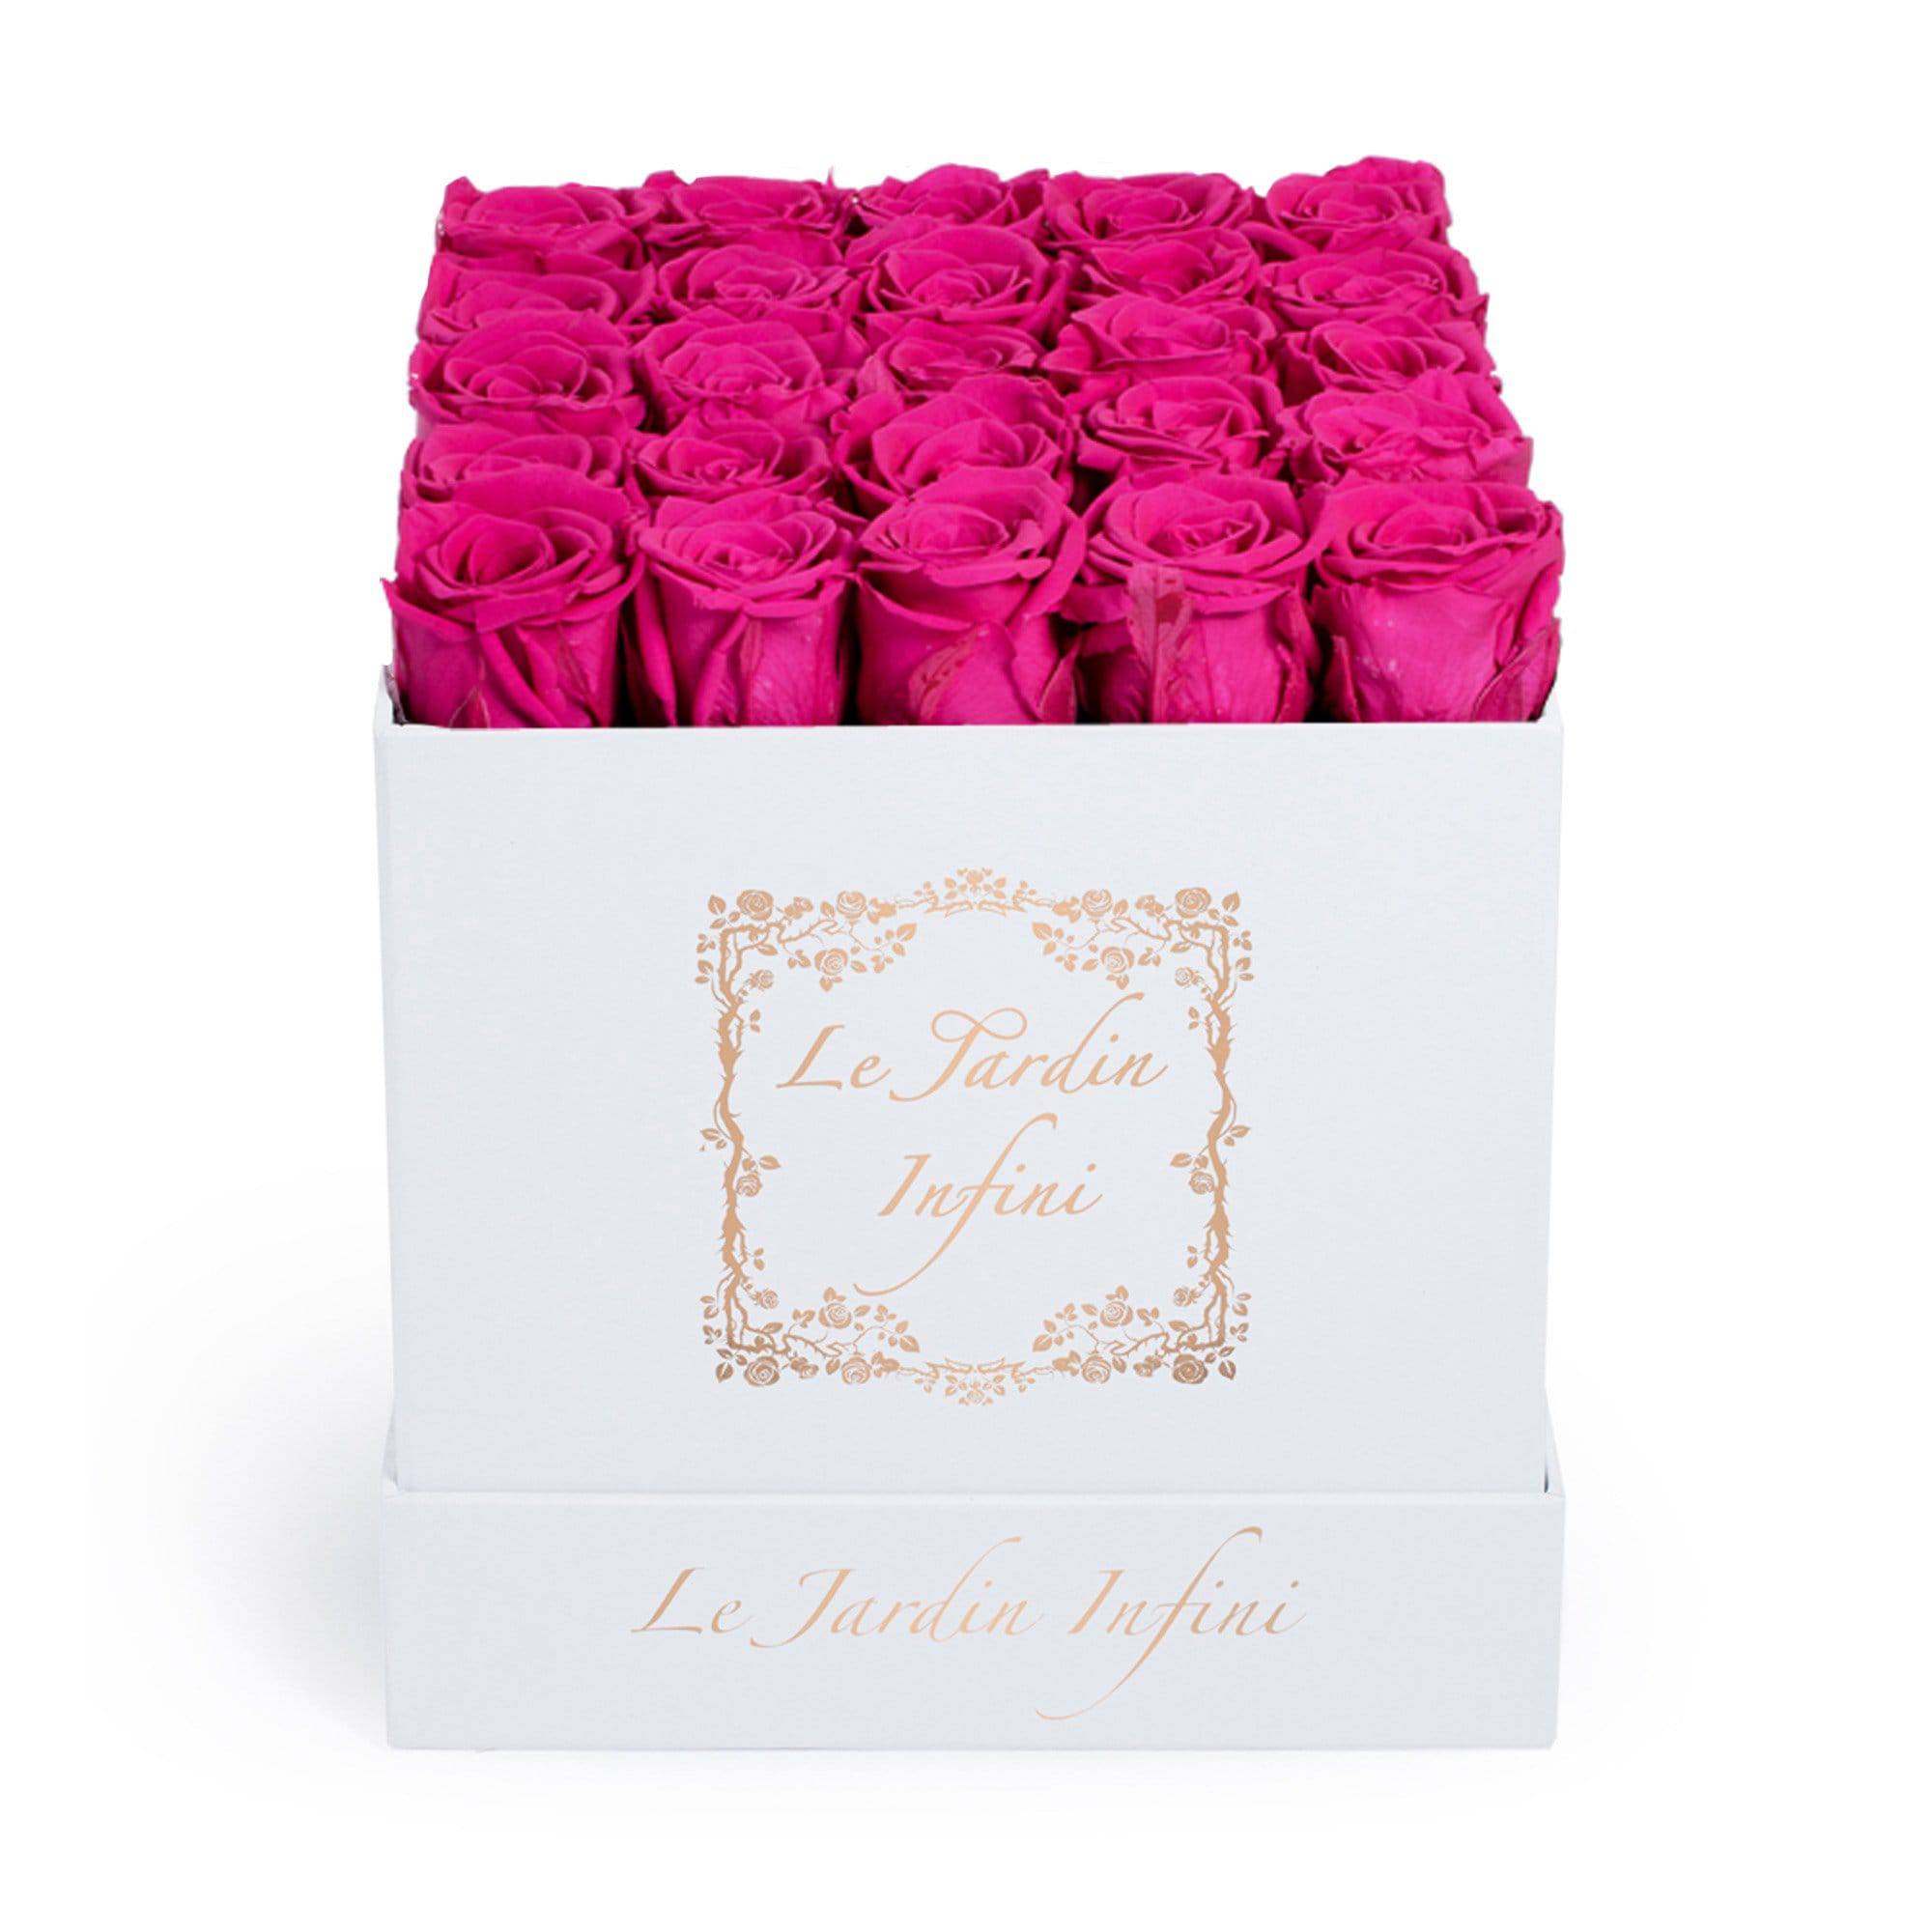 Hot Pink Preserved Roses - Medium Square White Box - Le Jardin Infini Roses in a Box